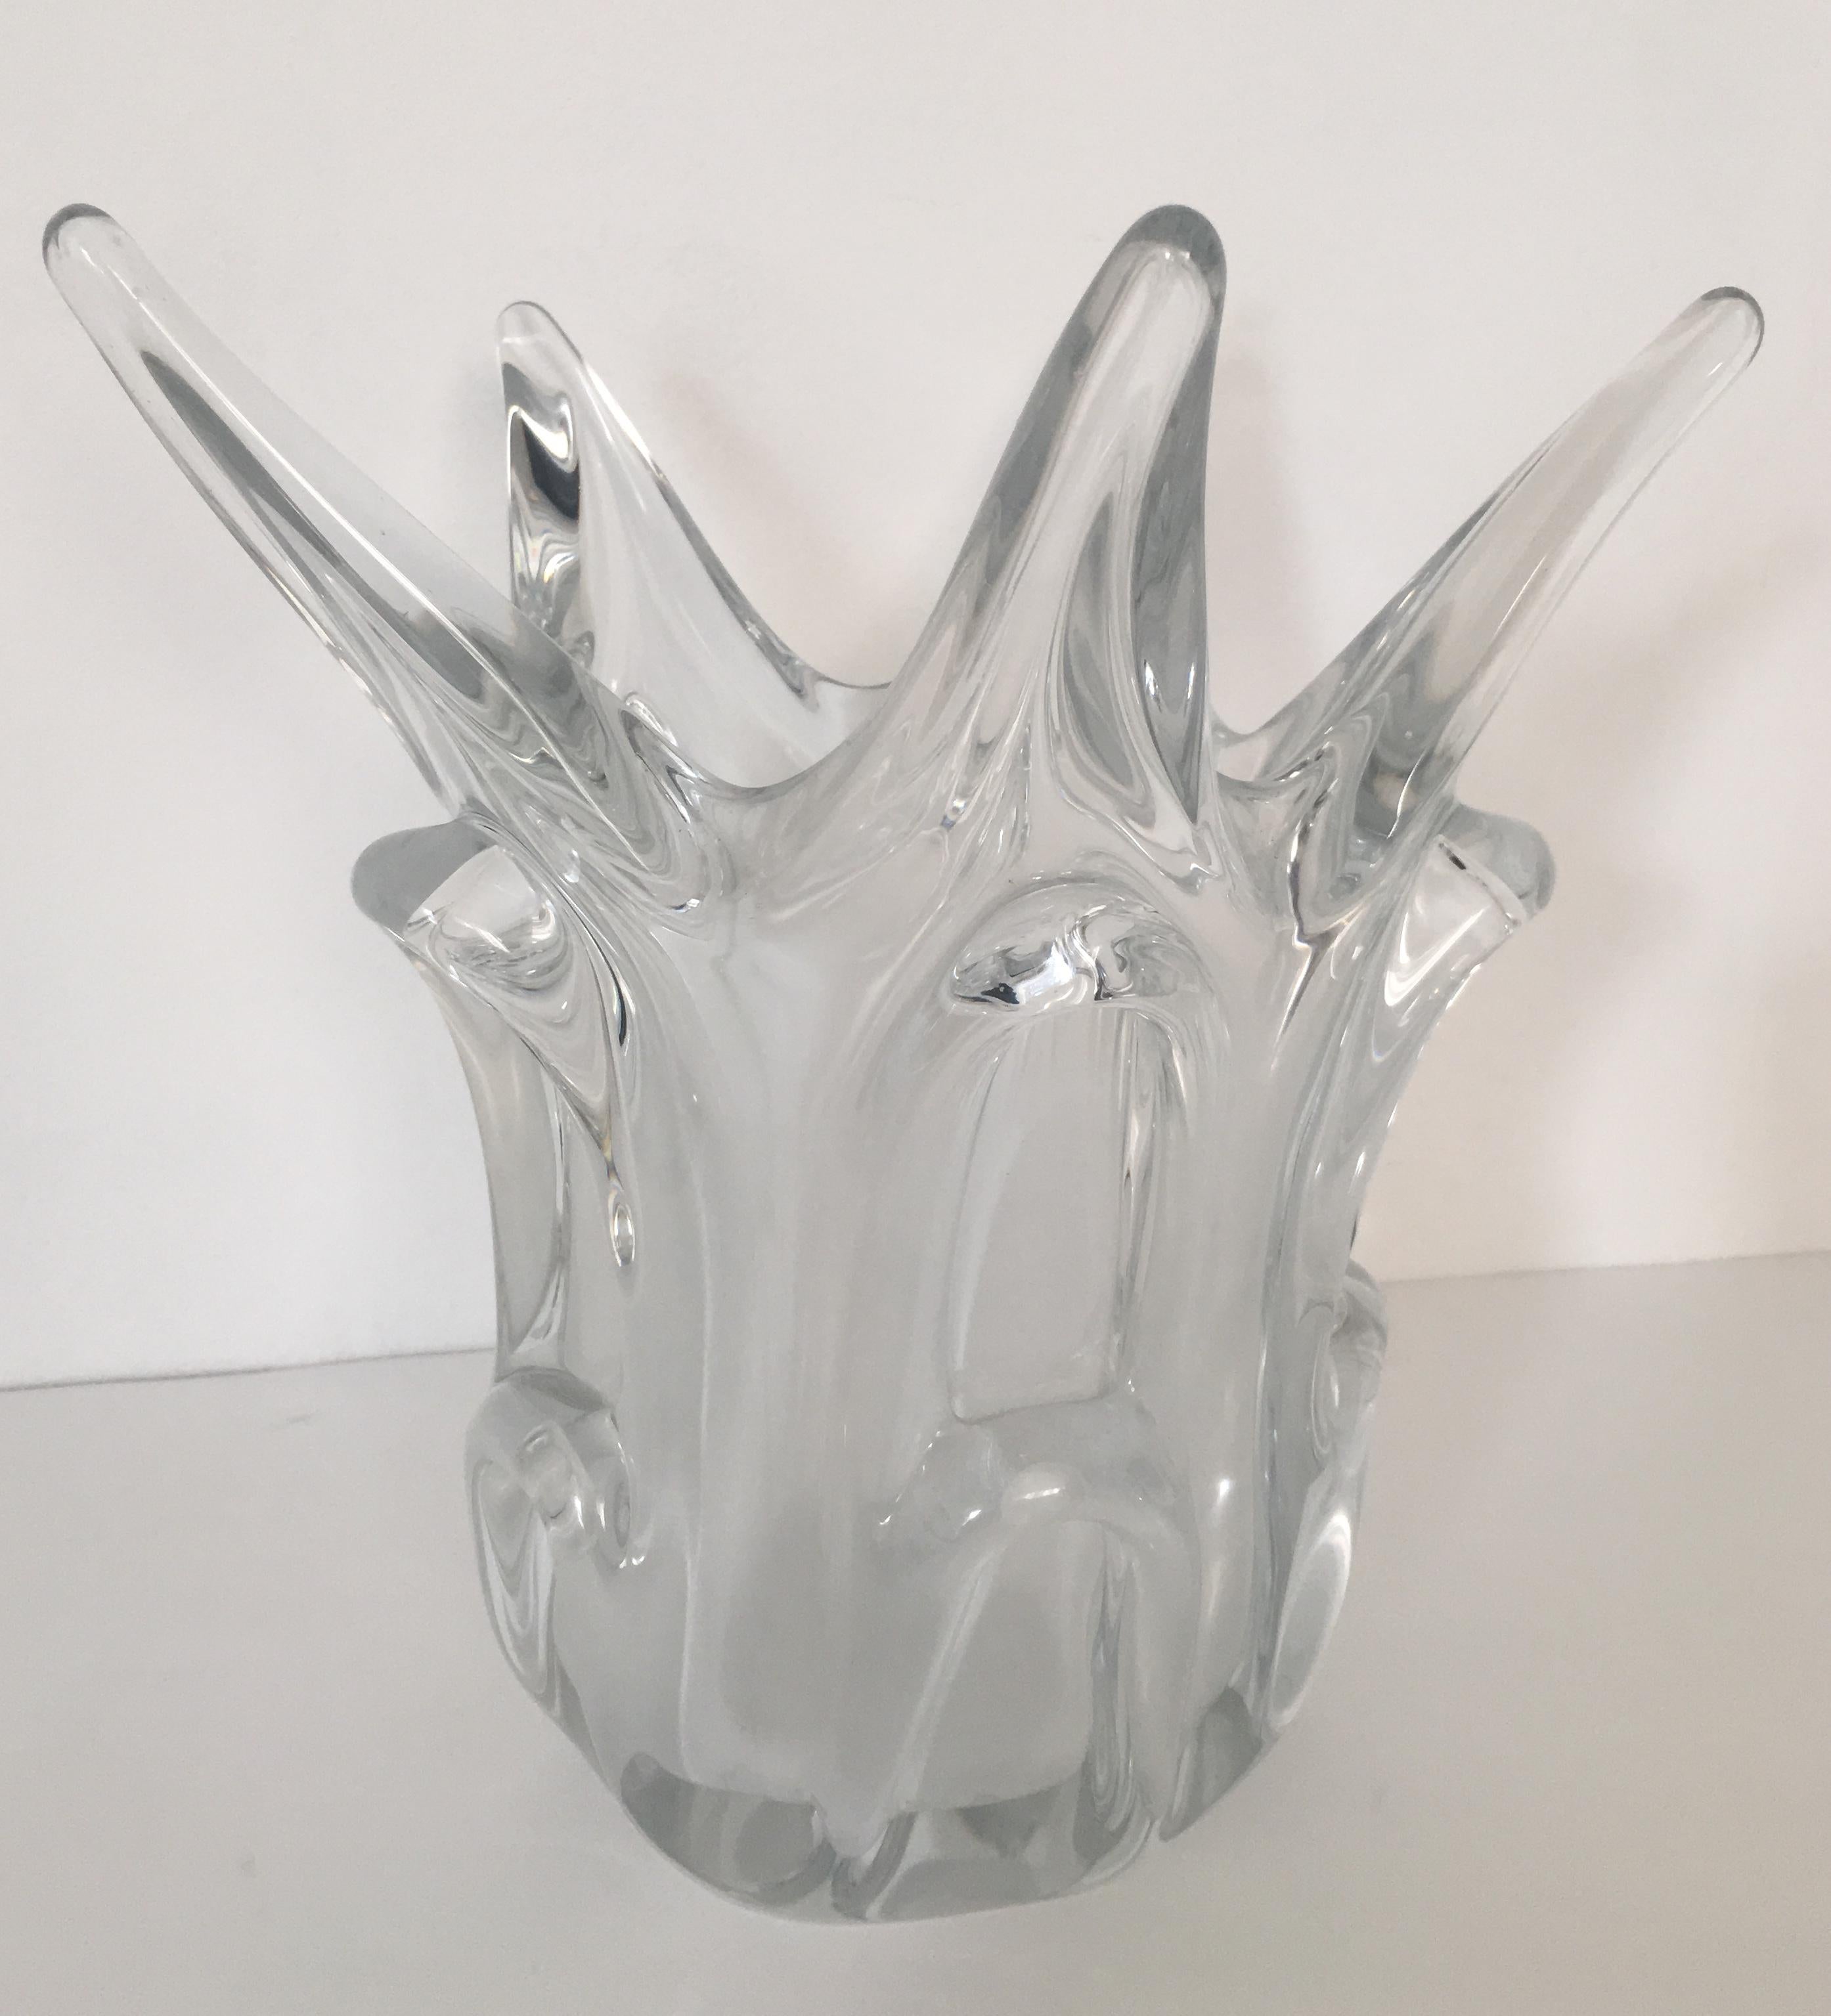 Midcentury French handcrafted fluted vase.
A wonderful design piece made of clear lead crystal typical of French art glass from the 1950s-1960s. 

Perfect condition. No chips nor cracks. Makes a great centerpiece and gift. 
Bears the makers mark on